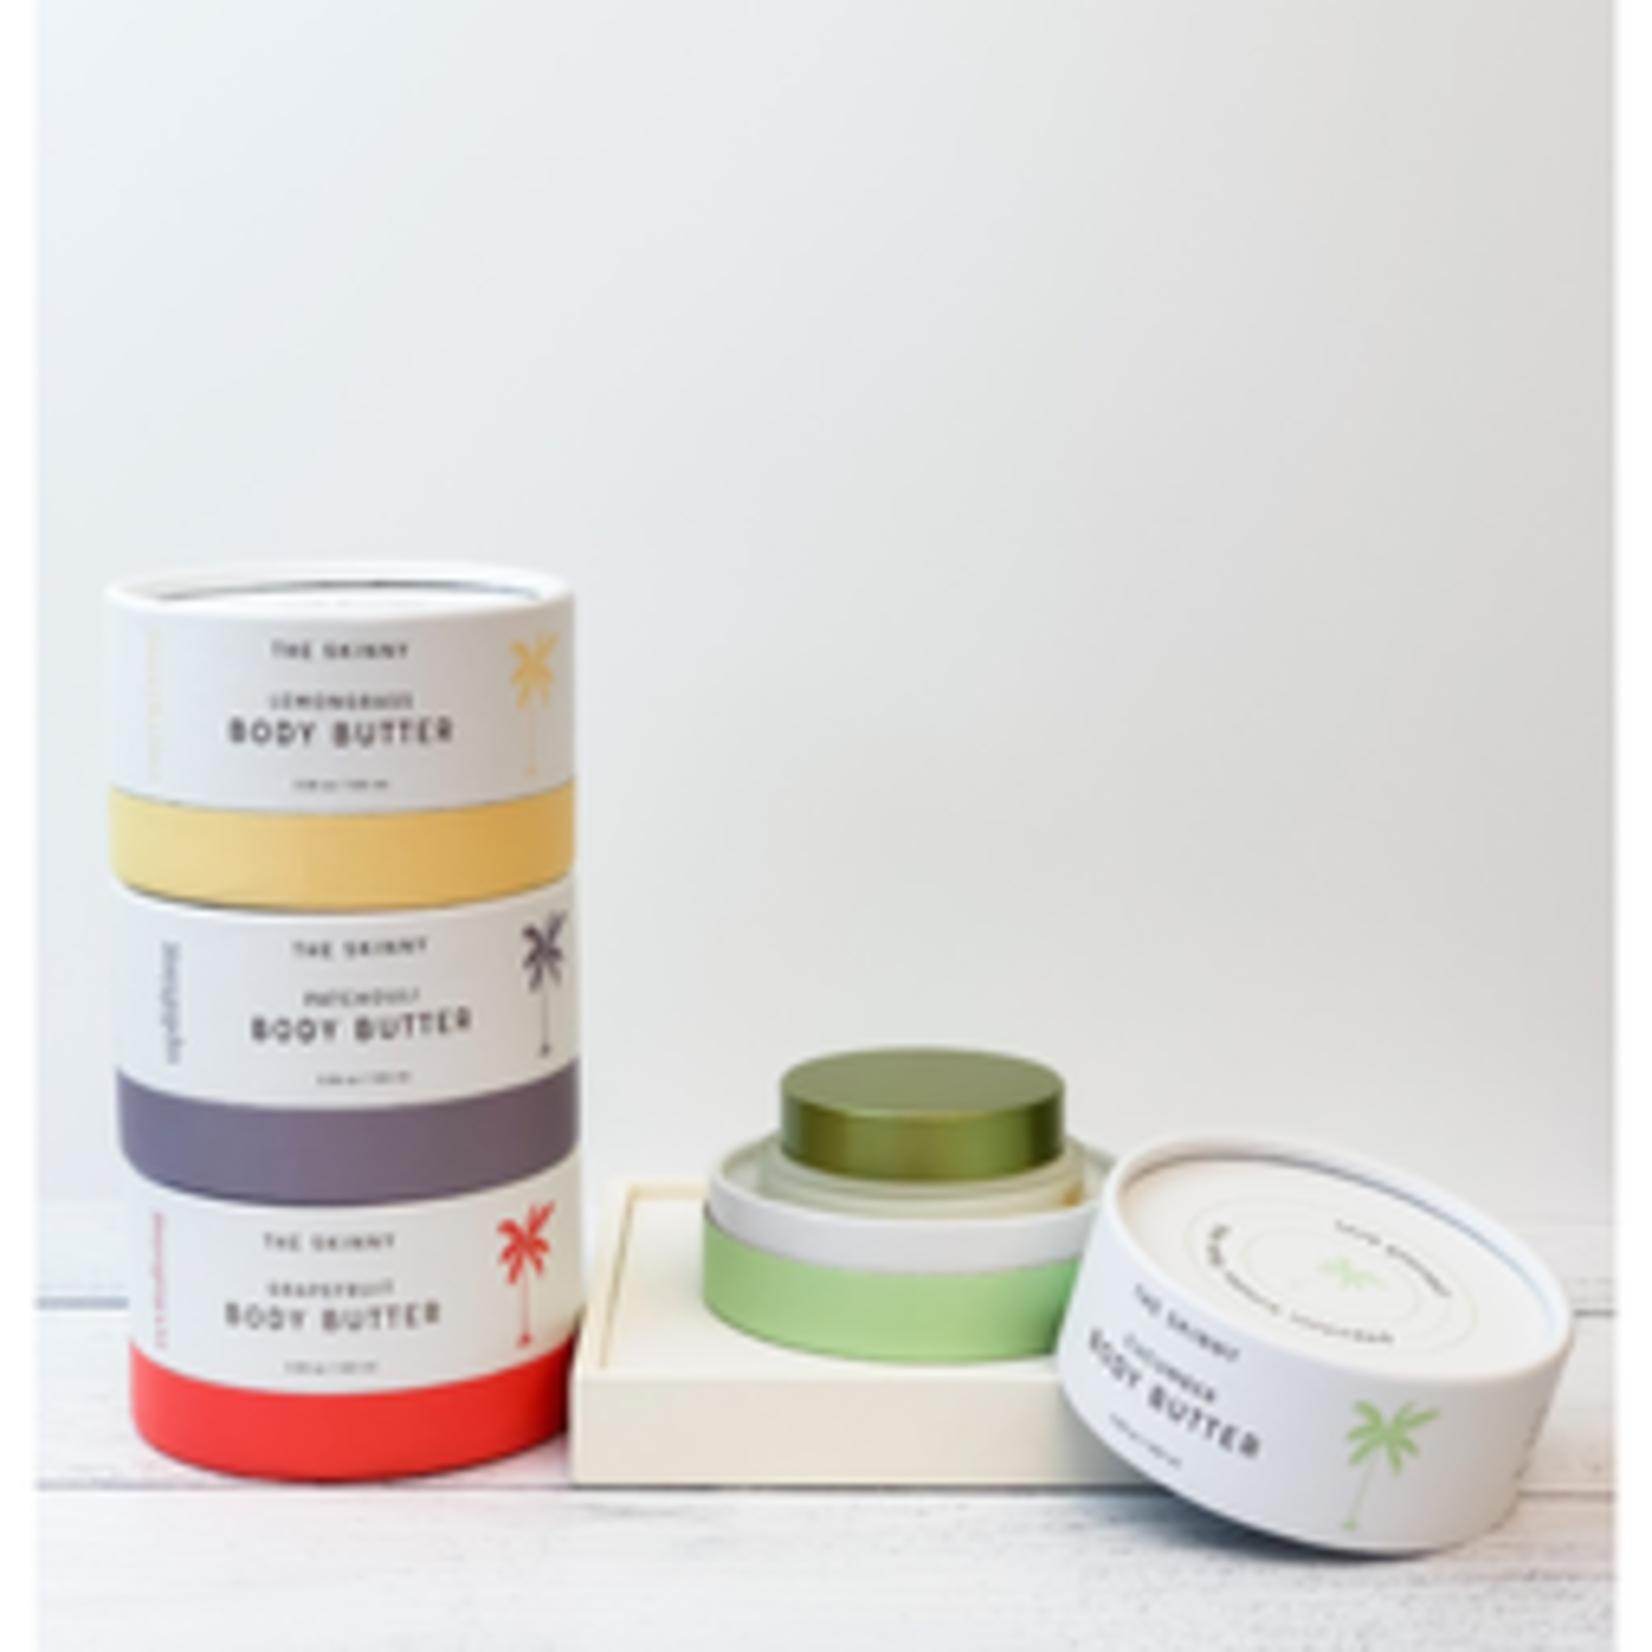 The Skinny Body Butter